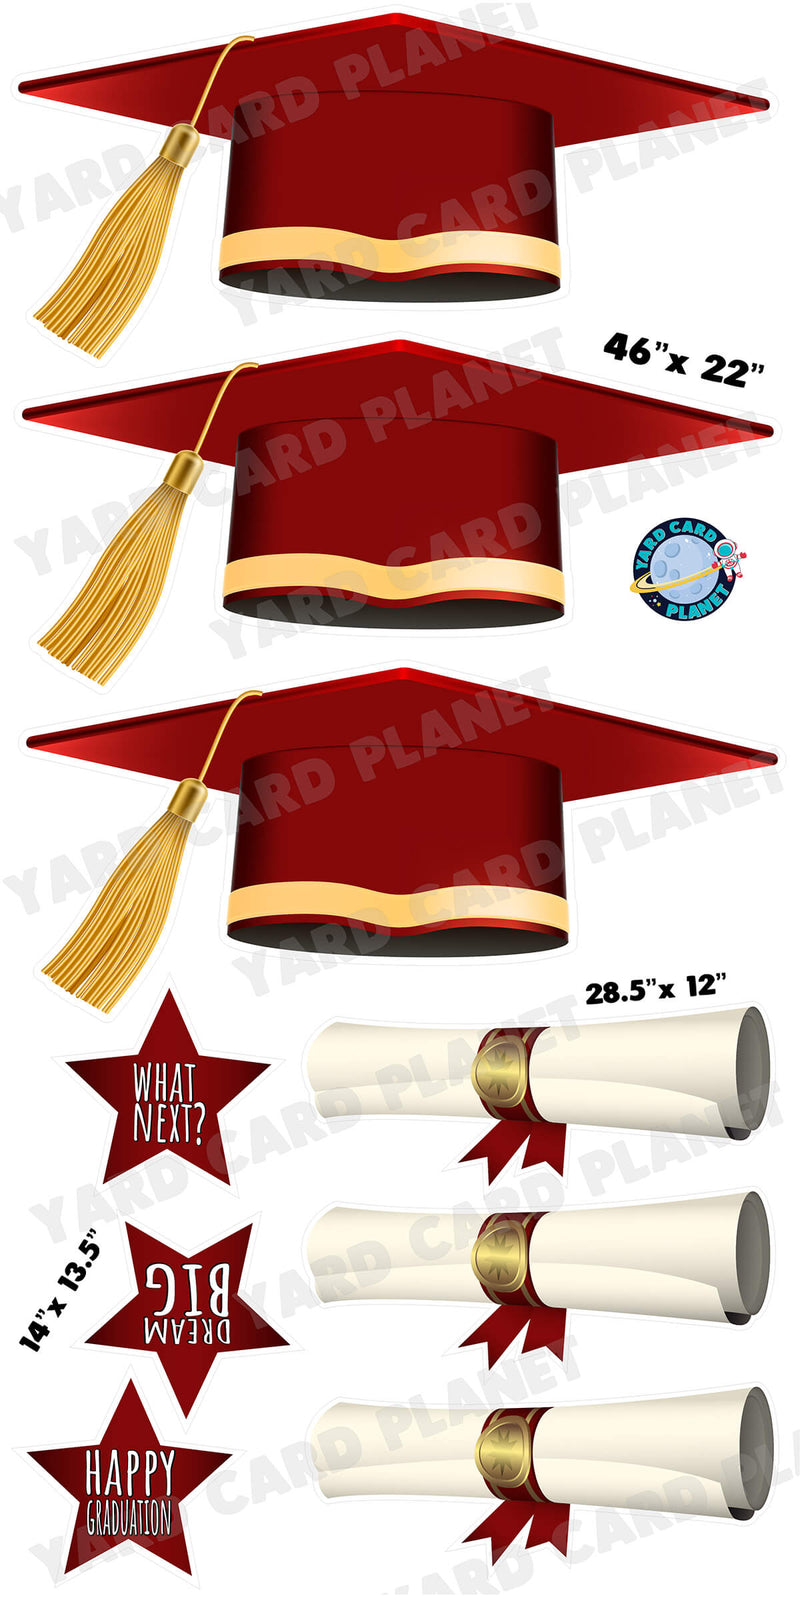 Extra Large Maroon Graduation Caps, Diplomas and Signs Yard Card Flair Set with measurements